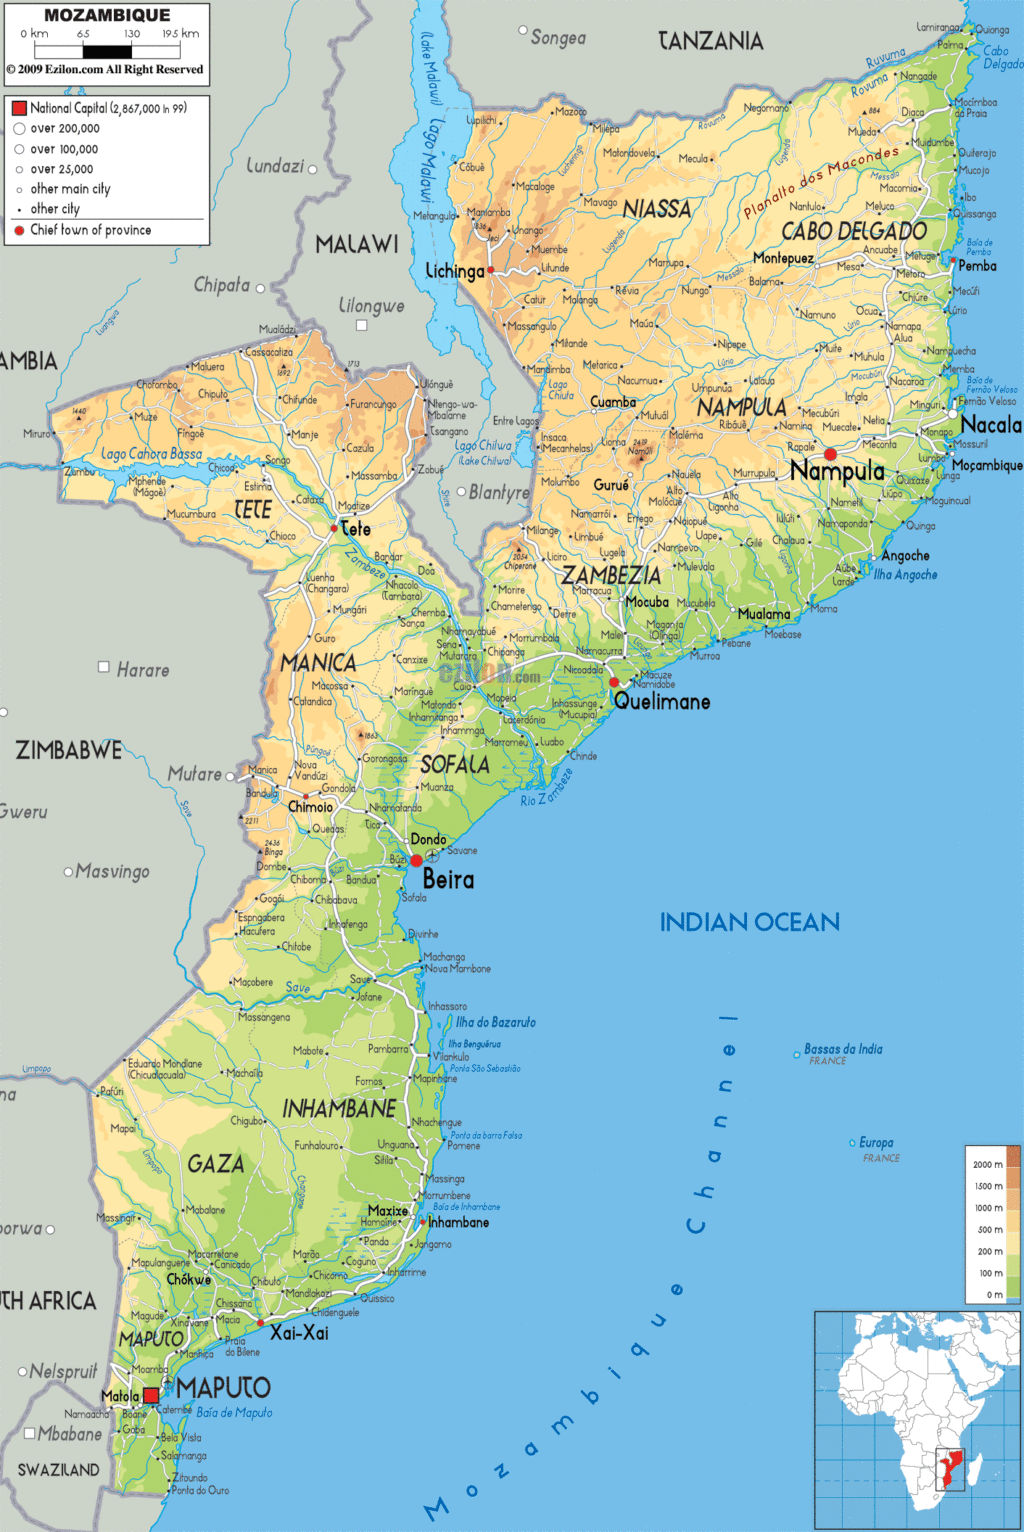 Mozambique physical map.